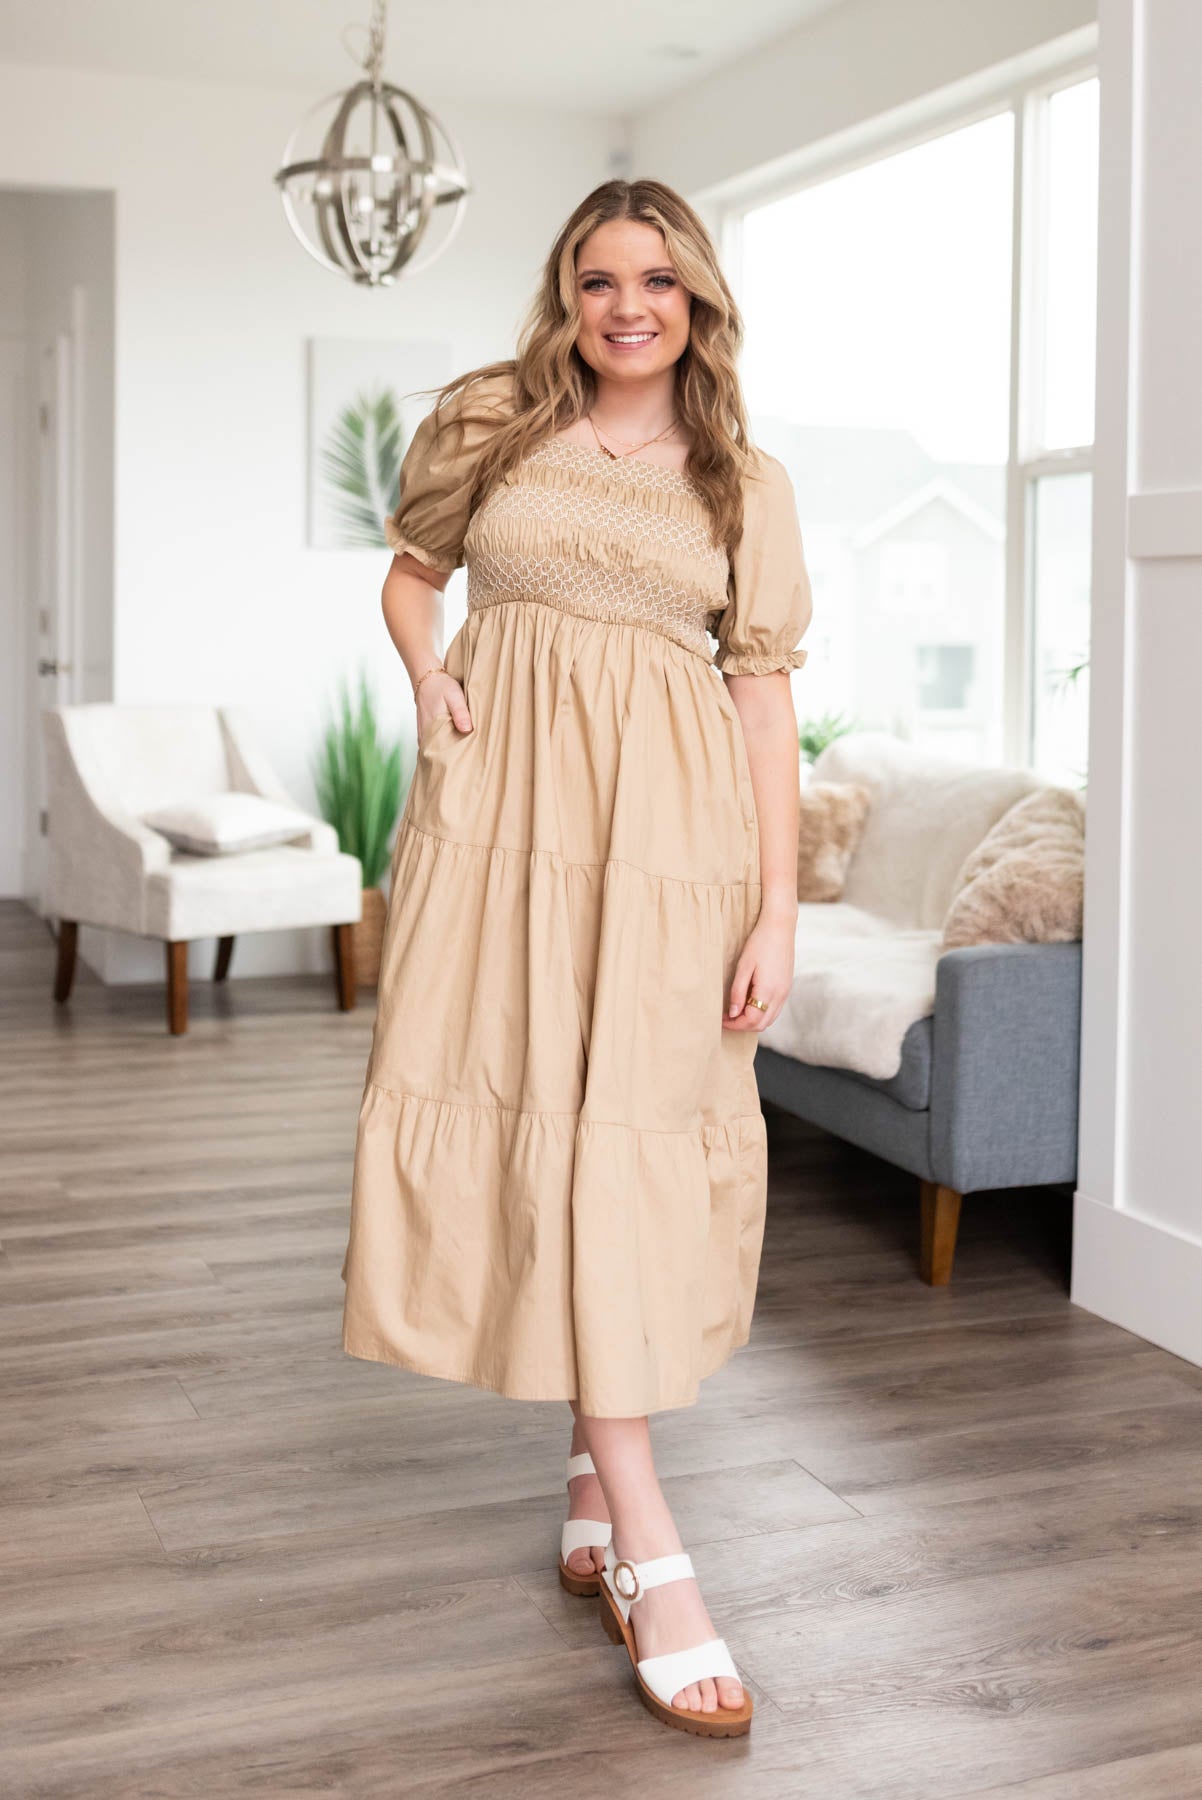 Short sleeve taupe dress with a tiered skirt